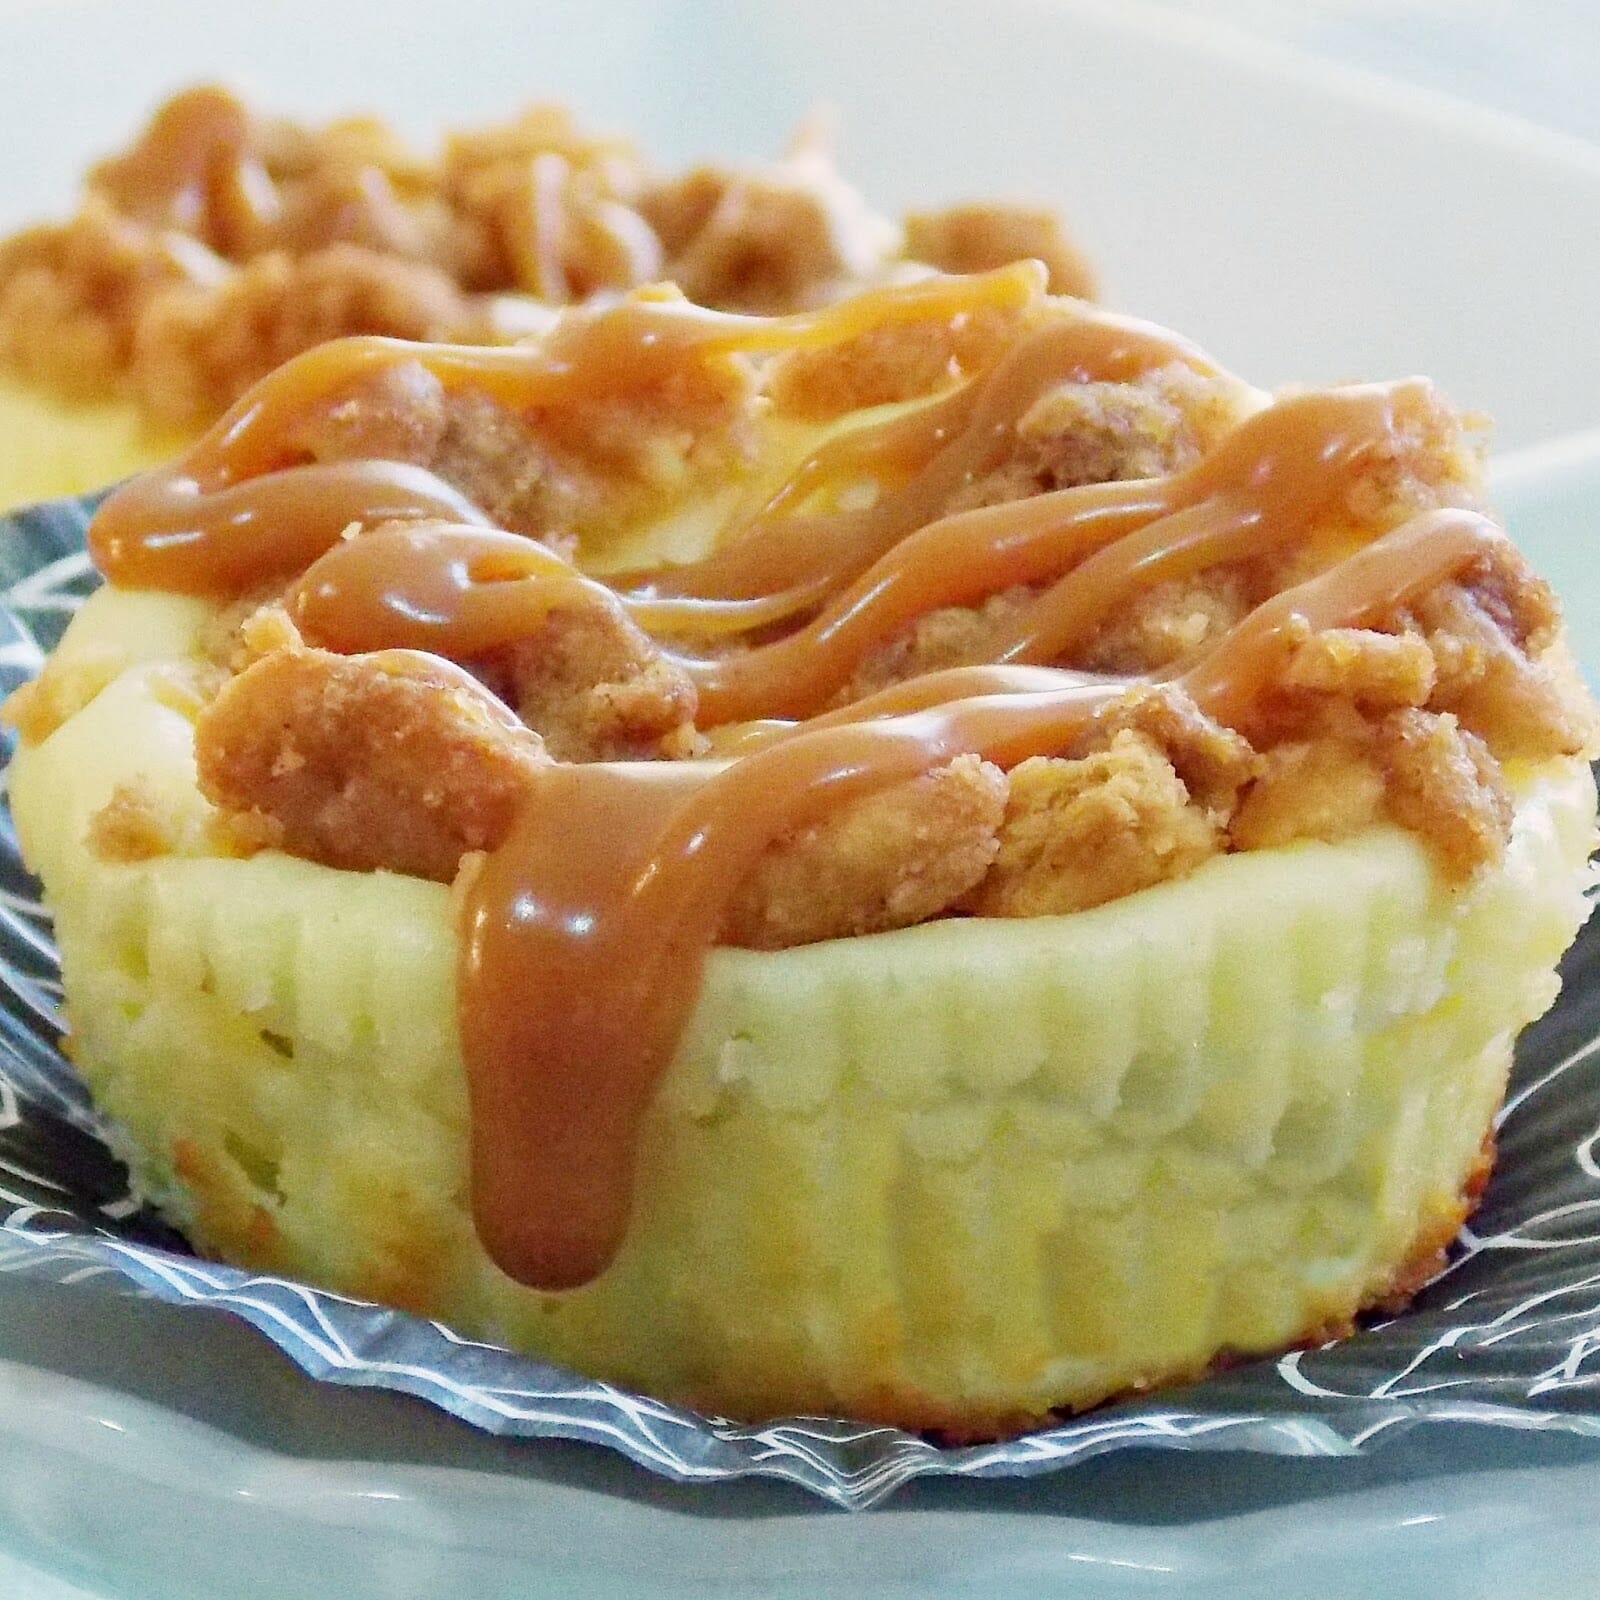 Baked mini cheesecake with a crumb topping and caramel drizzle.